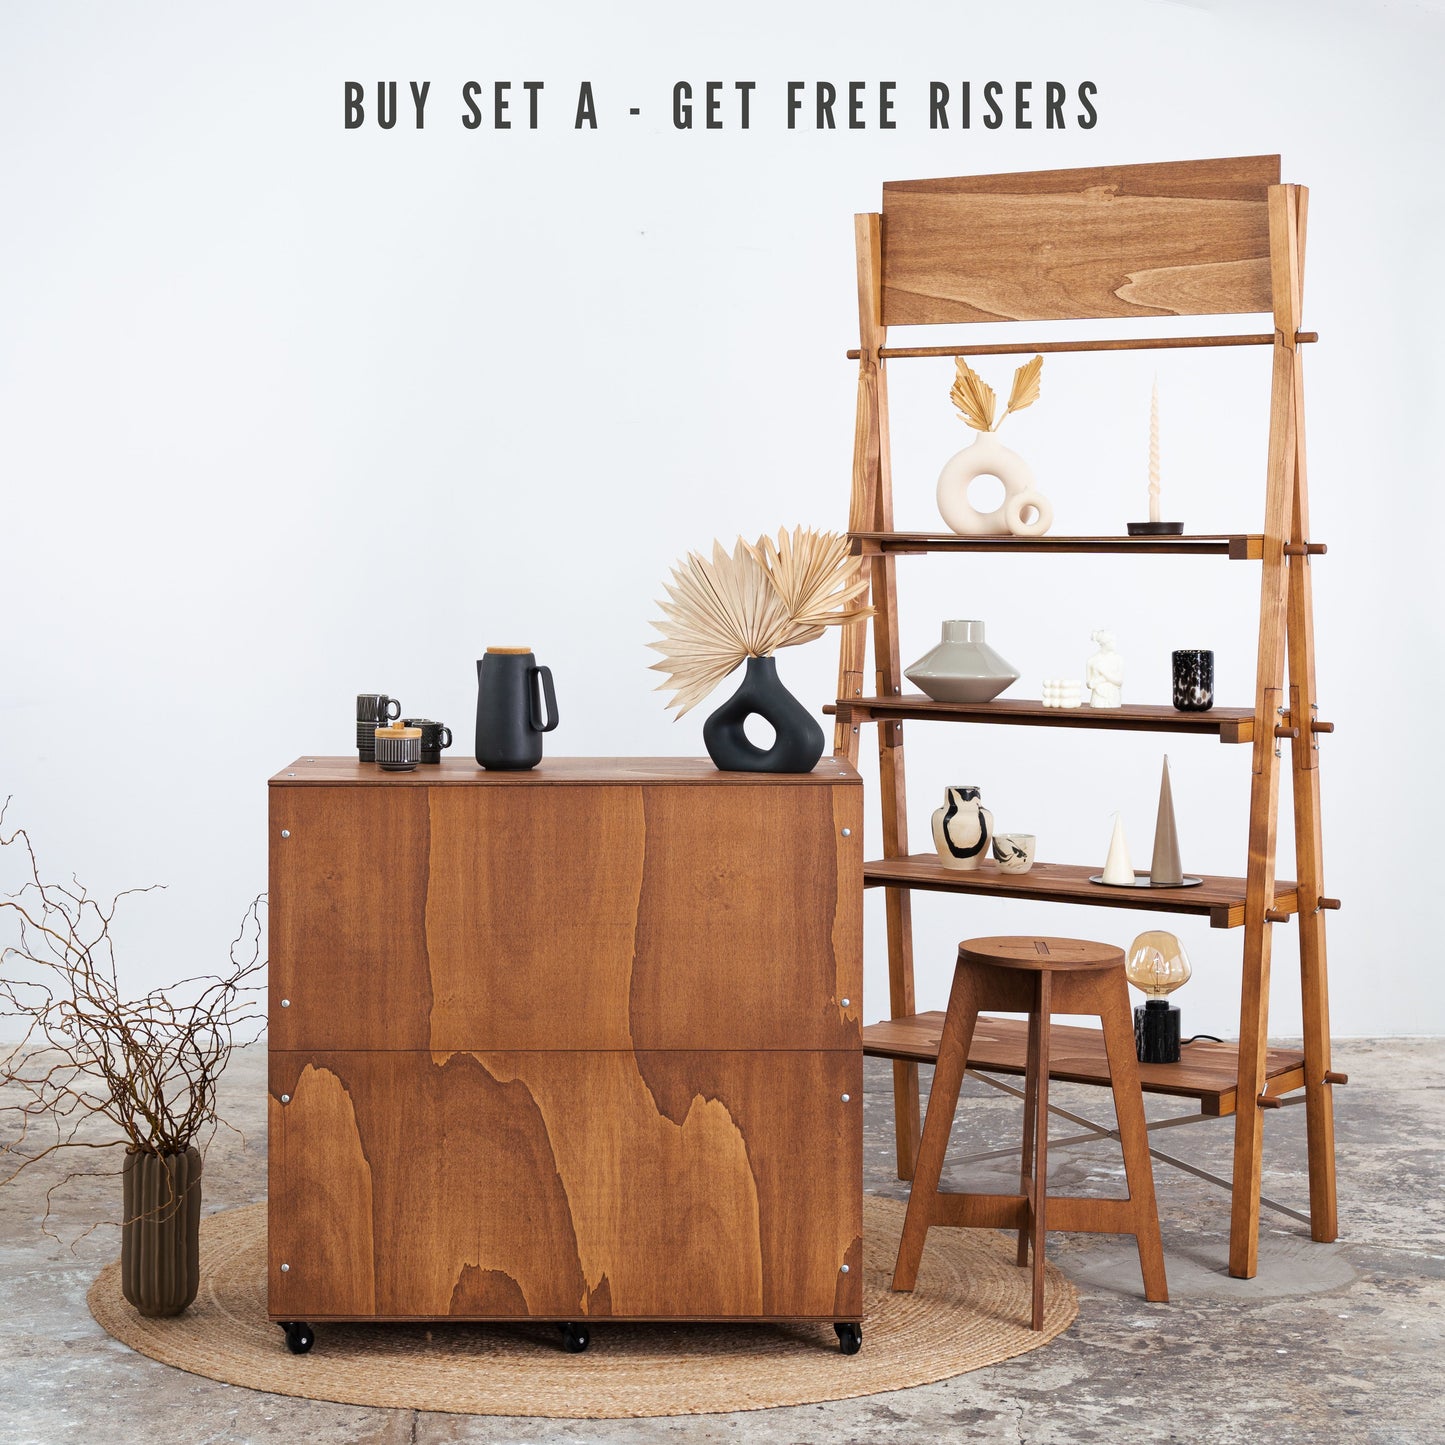 SET Glasgow CF: Checkout stand VC-08-W-CF, shelving VS-03-CF and bar stool in coffee color